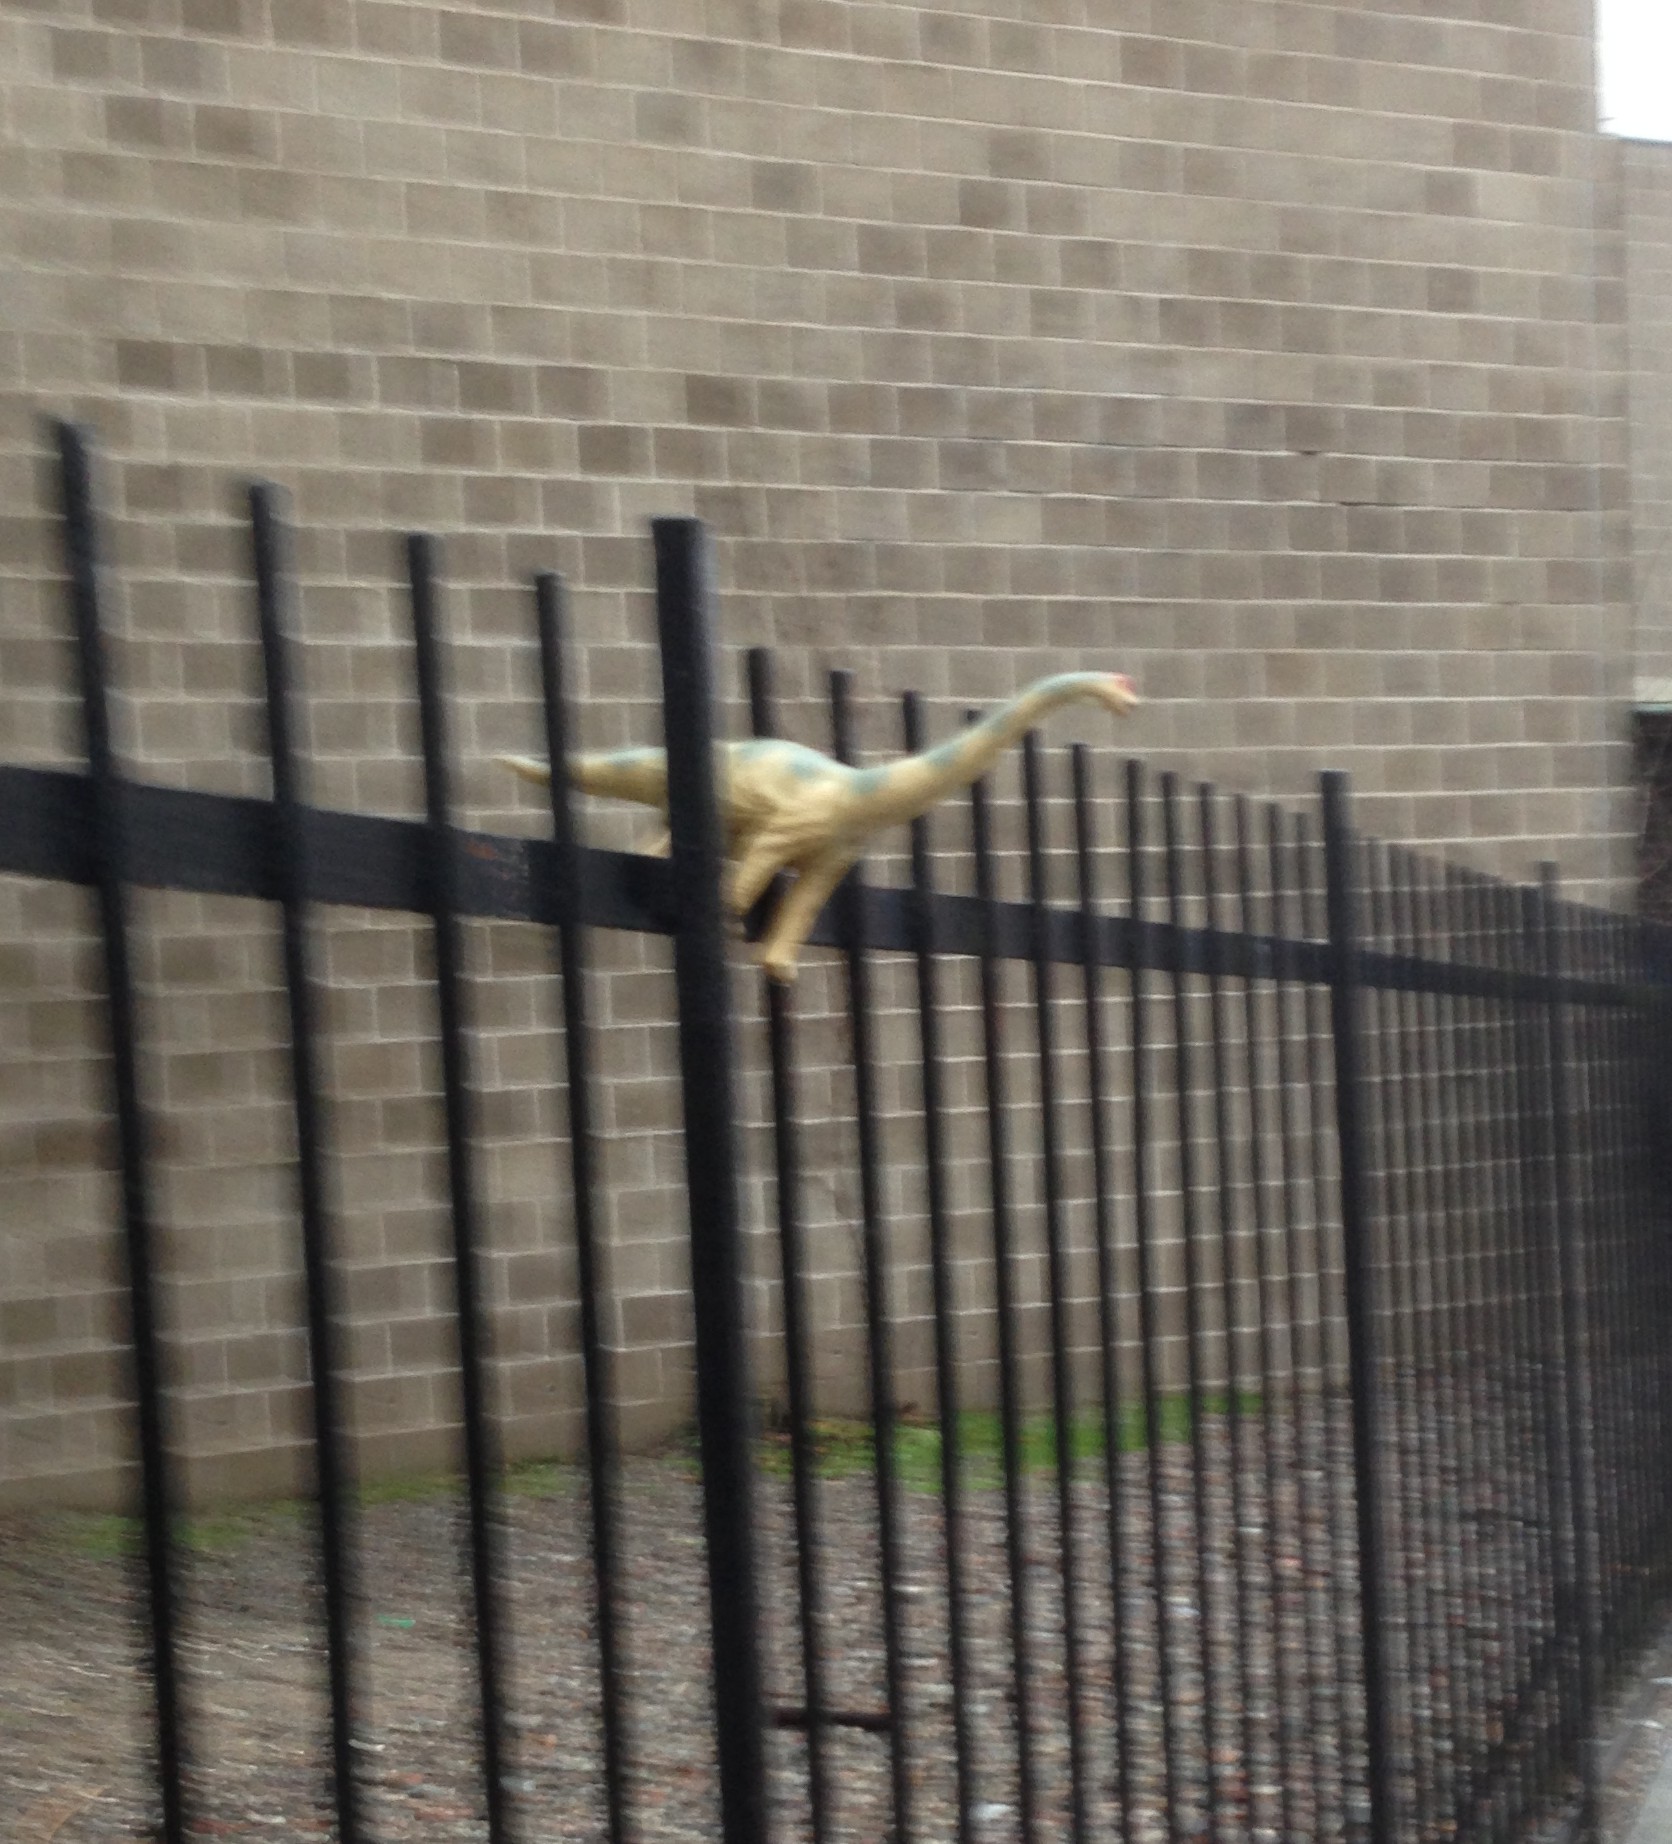 image shows toy dinosaur standing on a fence